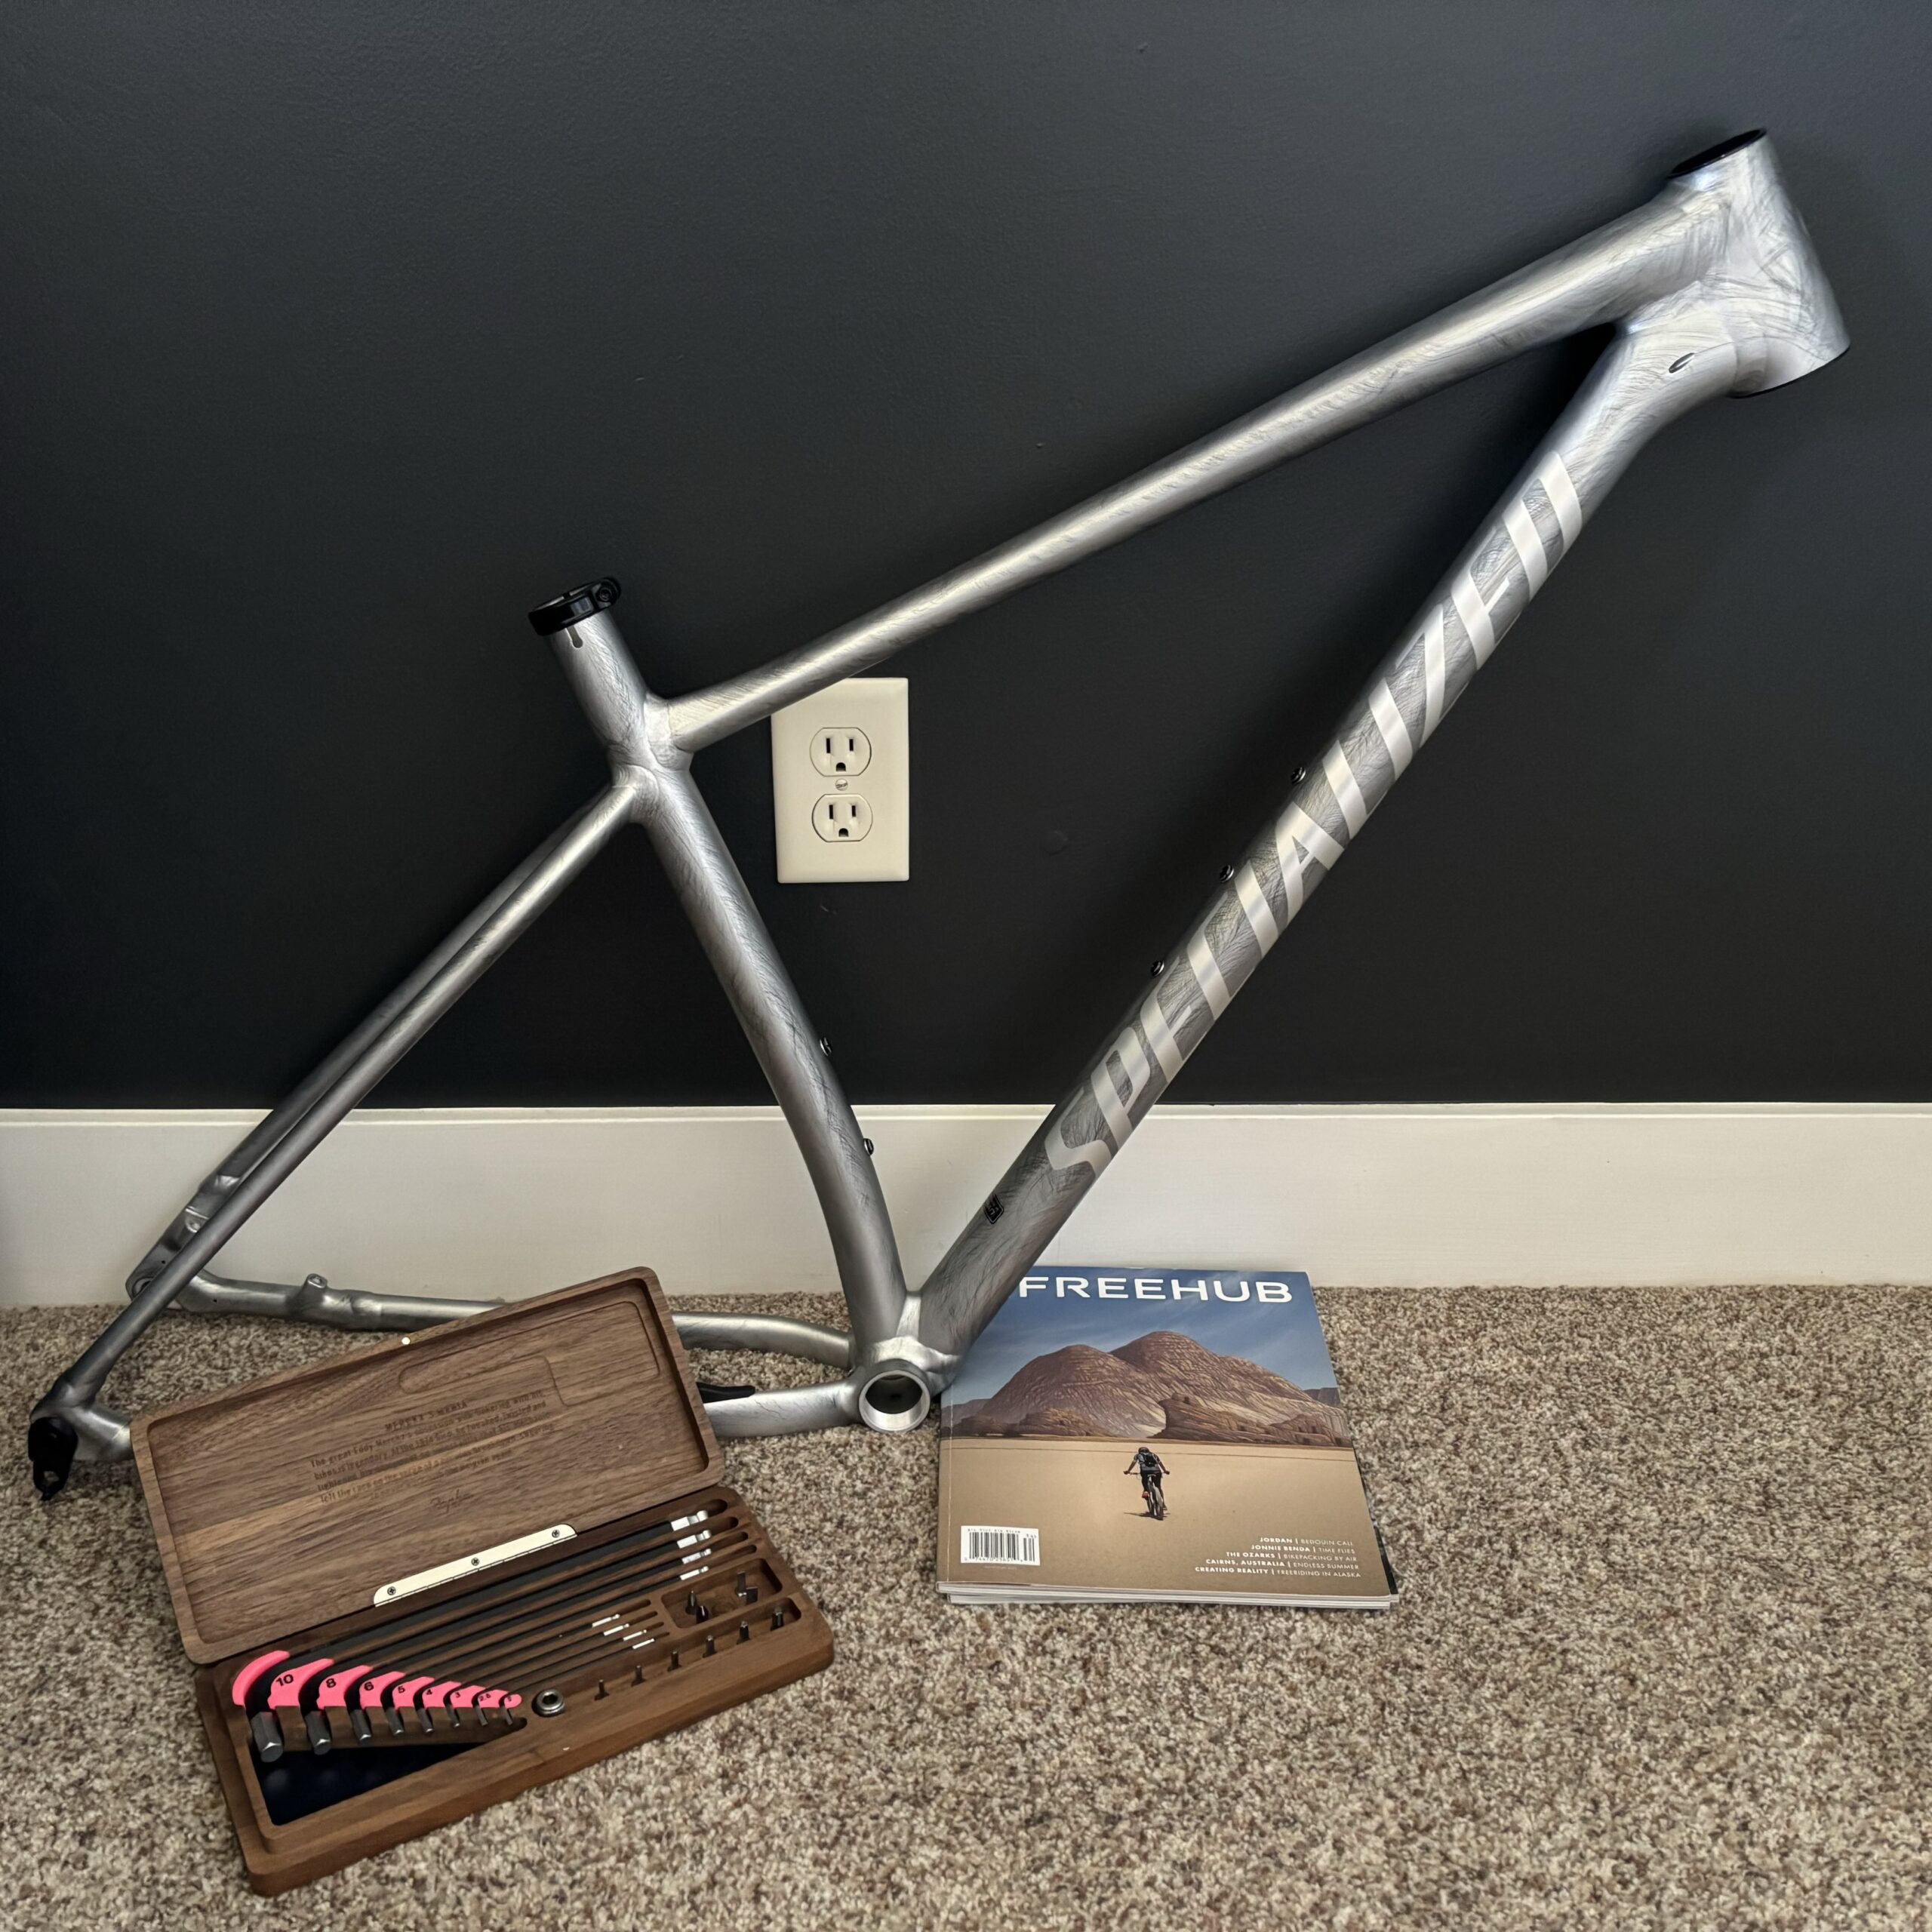 2023 Specialized Chisel Frame